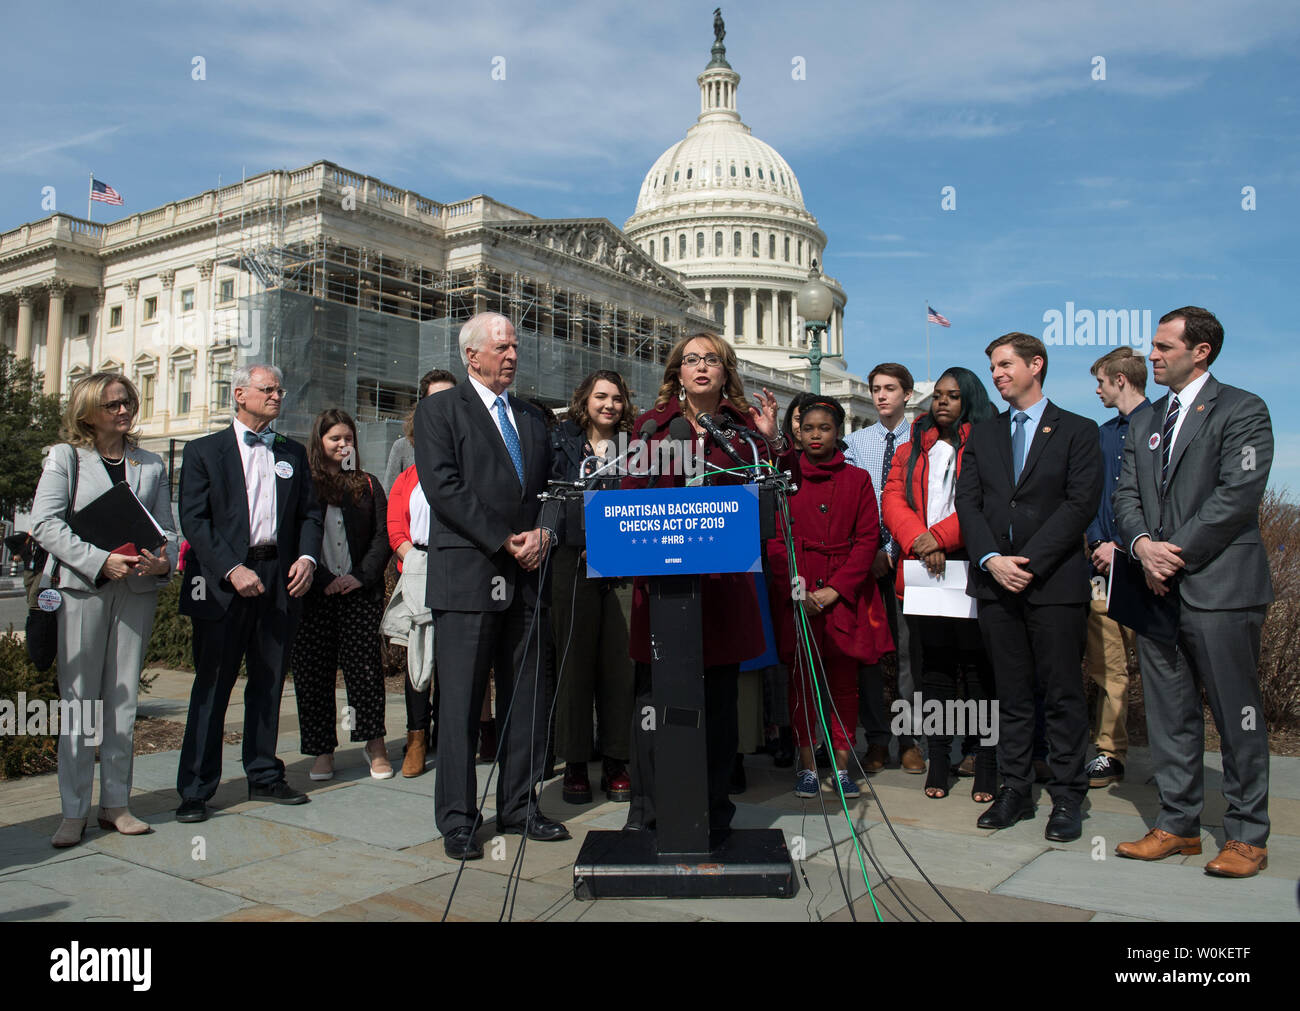 Former Rep. Gabrielle Giffords, D-Ariz., speaks at a news conference on H.R.8, the Bipartisan Background Checks Act of 2019, on Capitol Hill in Washington, D.C. on February 26, 2019. The bill mandates background checks for all firearm sales. Photo by Kevin Dietsch/UPI Stock Photo